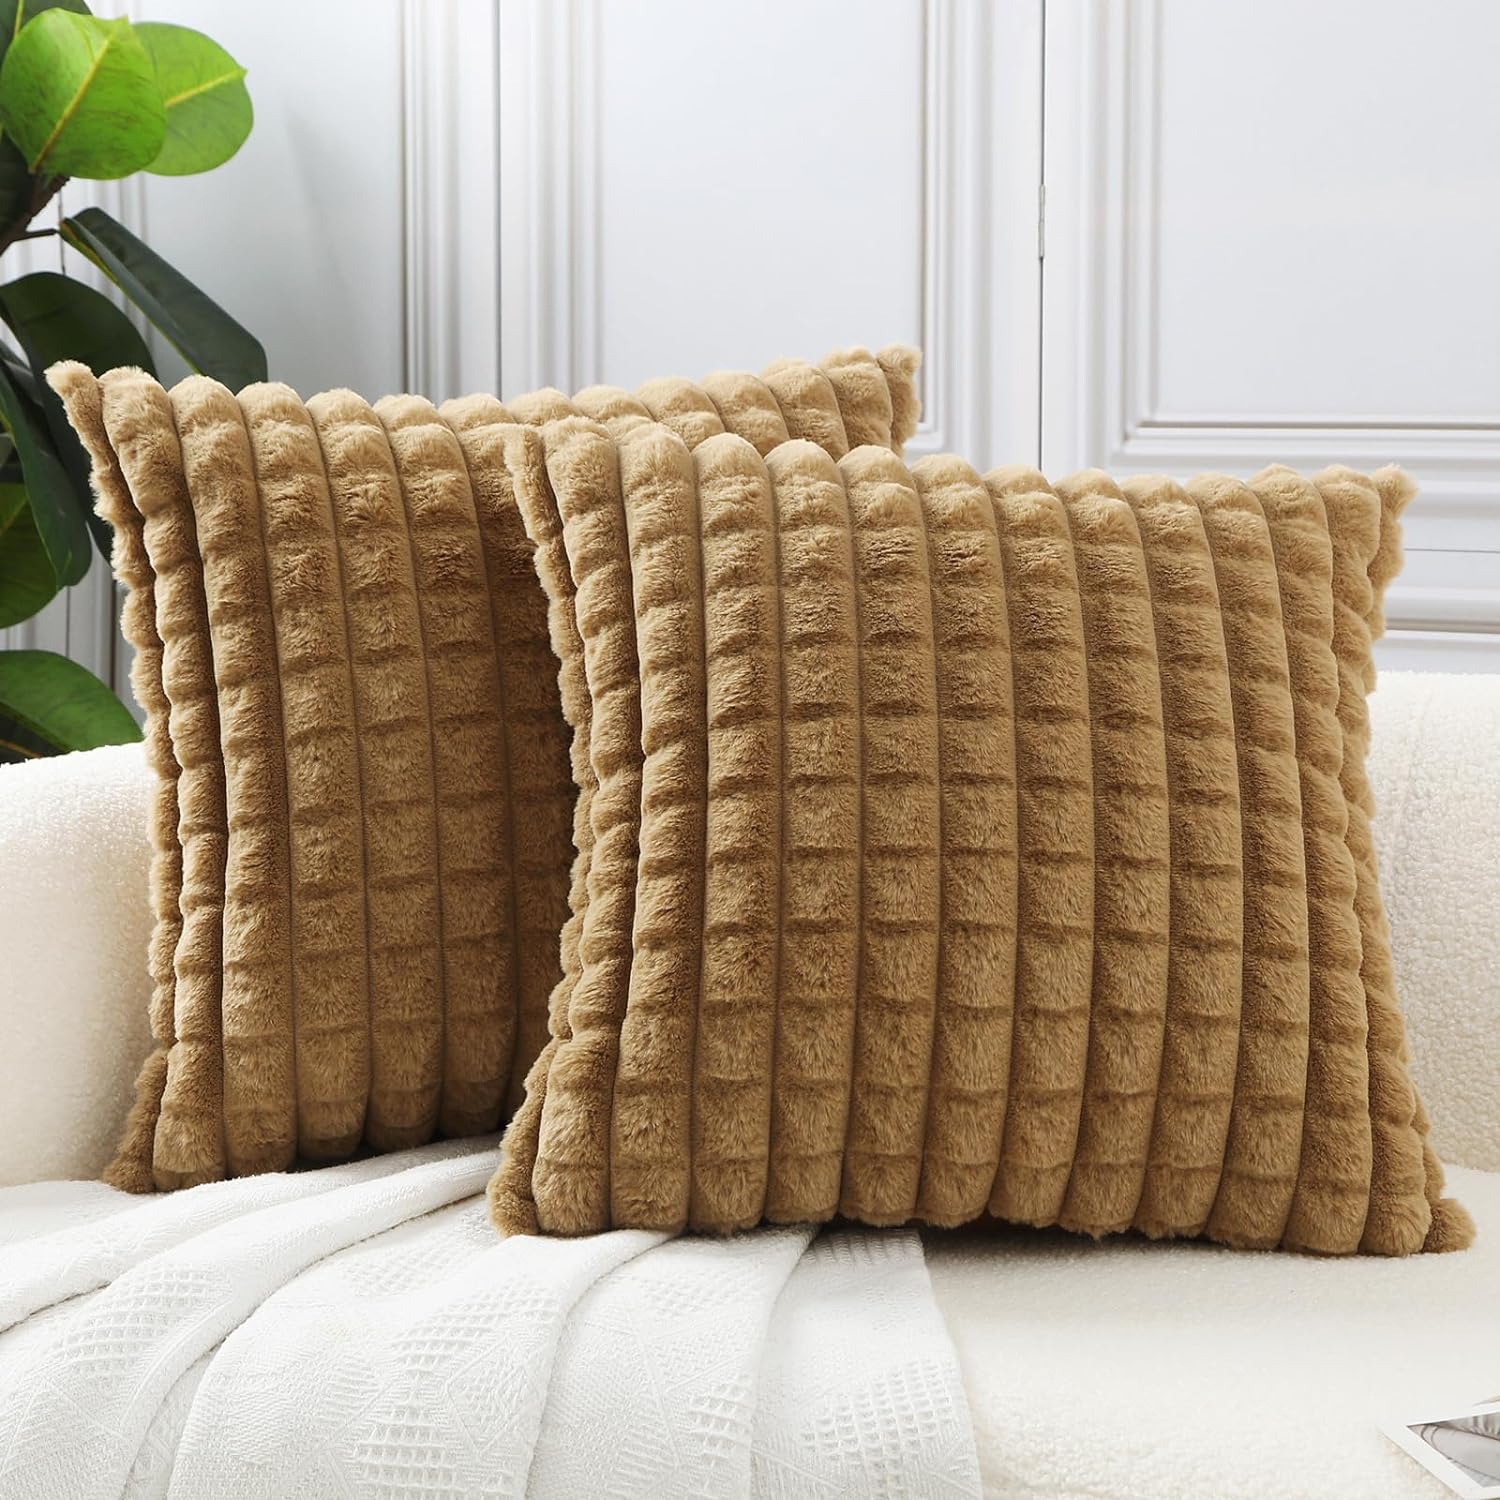 HPUK Faux Fur Plush Square Throw Pillow Covers 18x18 Inch, Decorative Fluffy Couch Pillow Covers for Living Room, Accent Cozy and Fuzzy Pillow Covers for Couch, Sofa, and Bedroom(Light Brown)